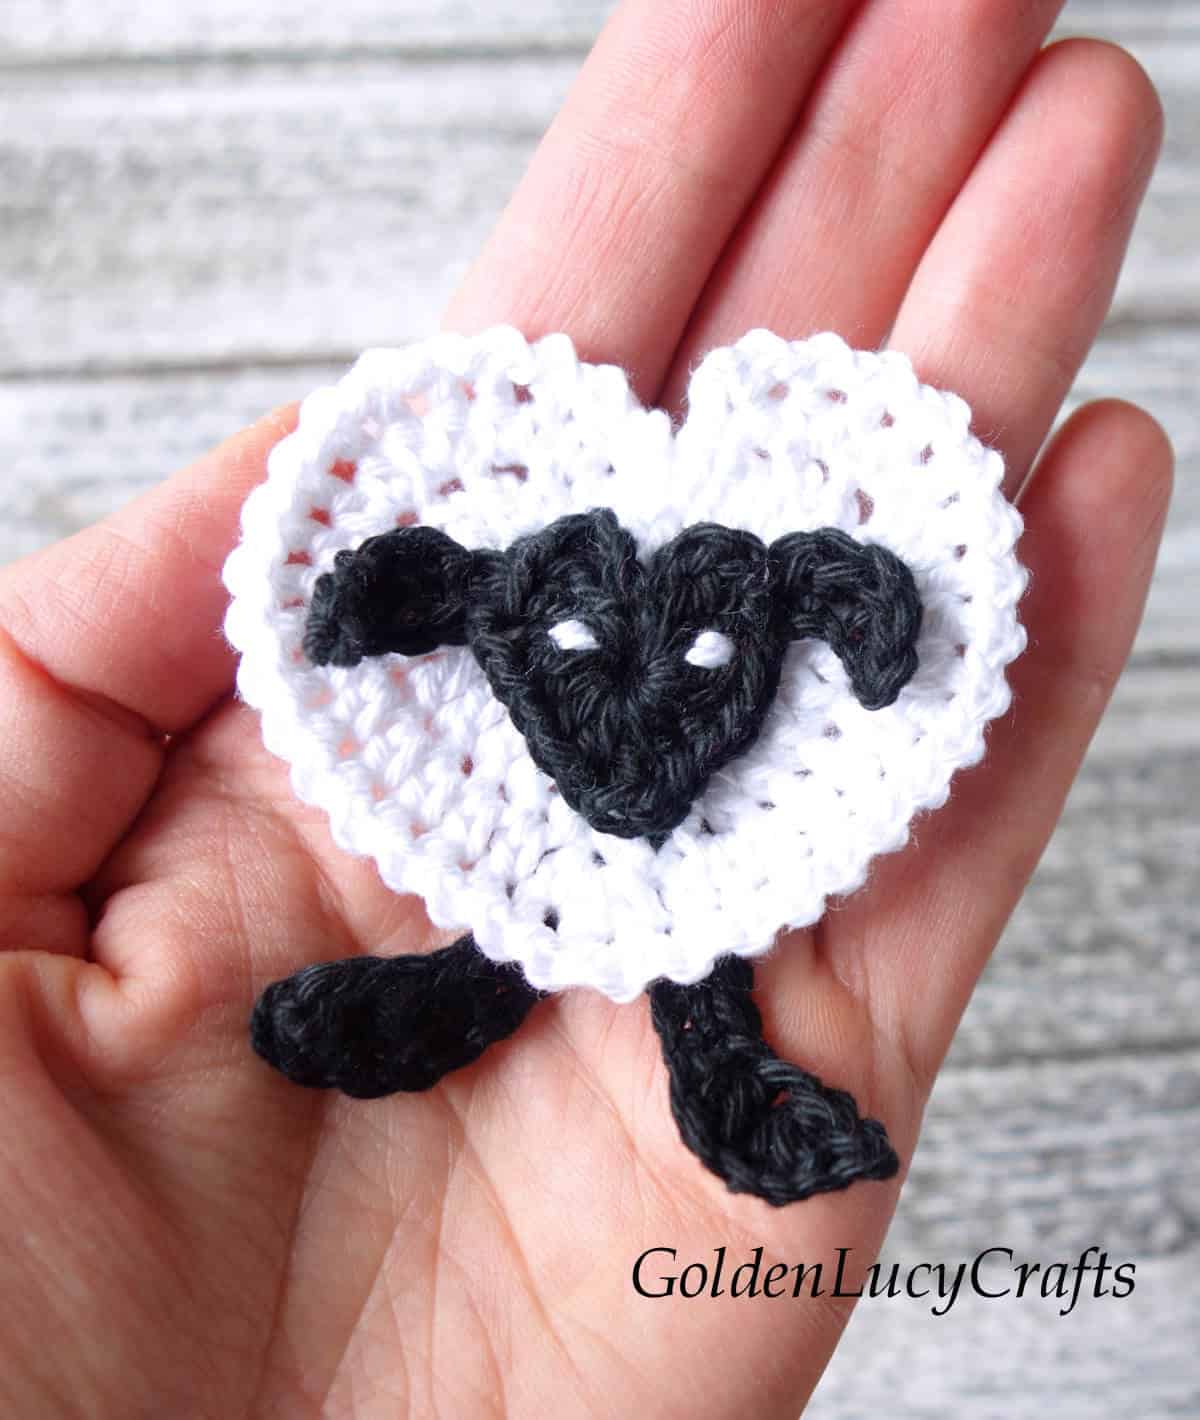 Crochet sheep applique in the palm of a hand.